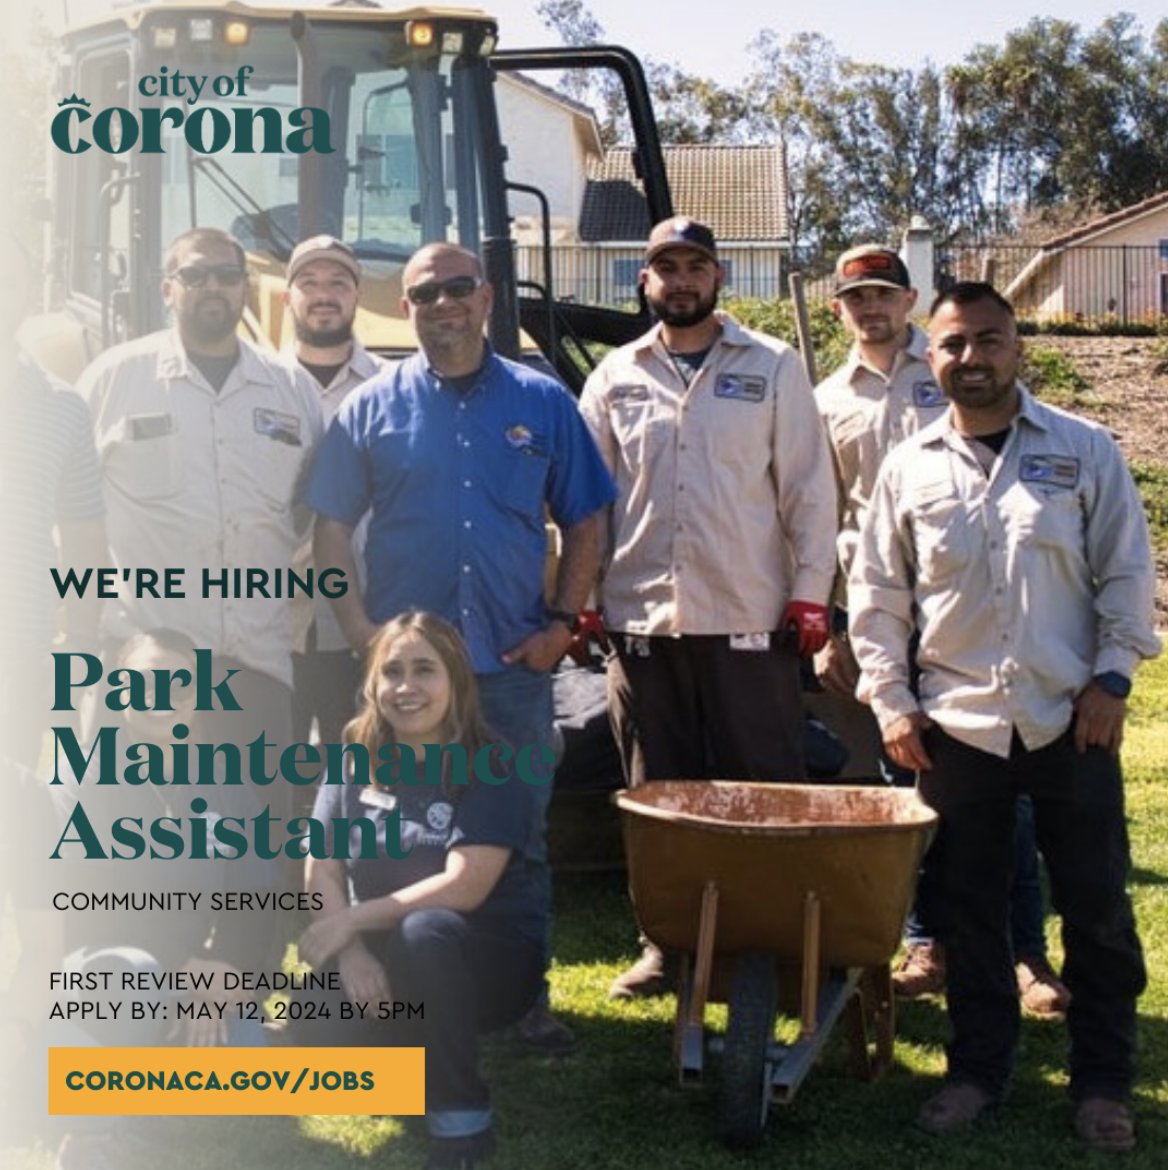 Our Community Services Team is hiring a Part-Time Non-Benefited Park Maintenance Assistant Read details + apply online: bit.ly/3JoZFD7